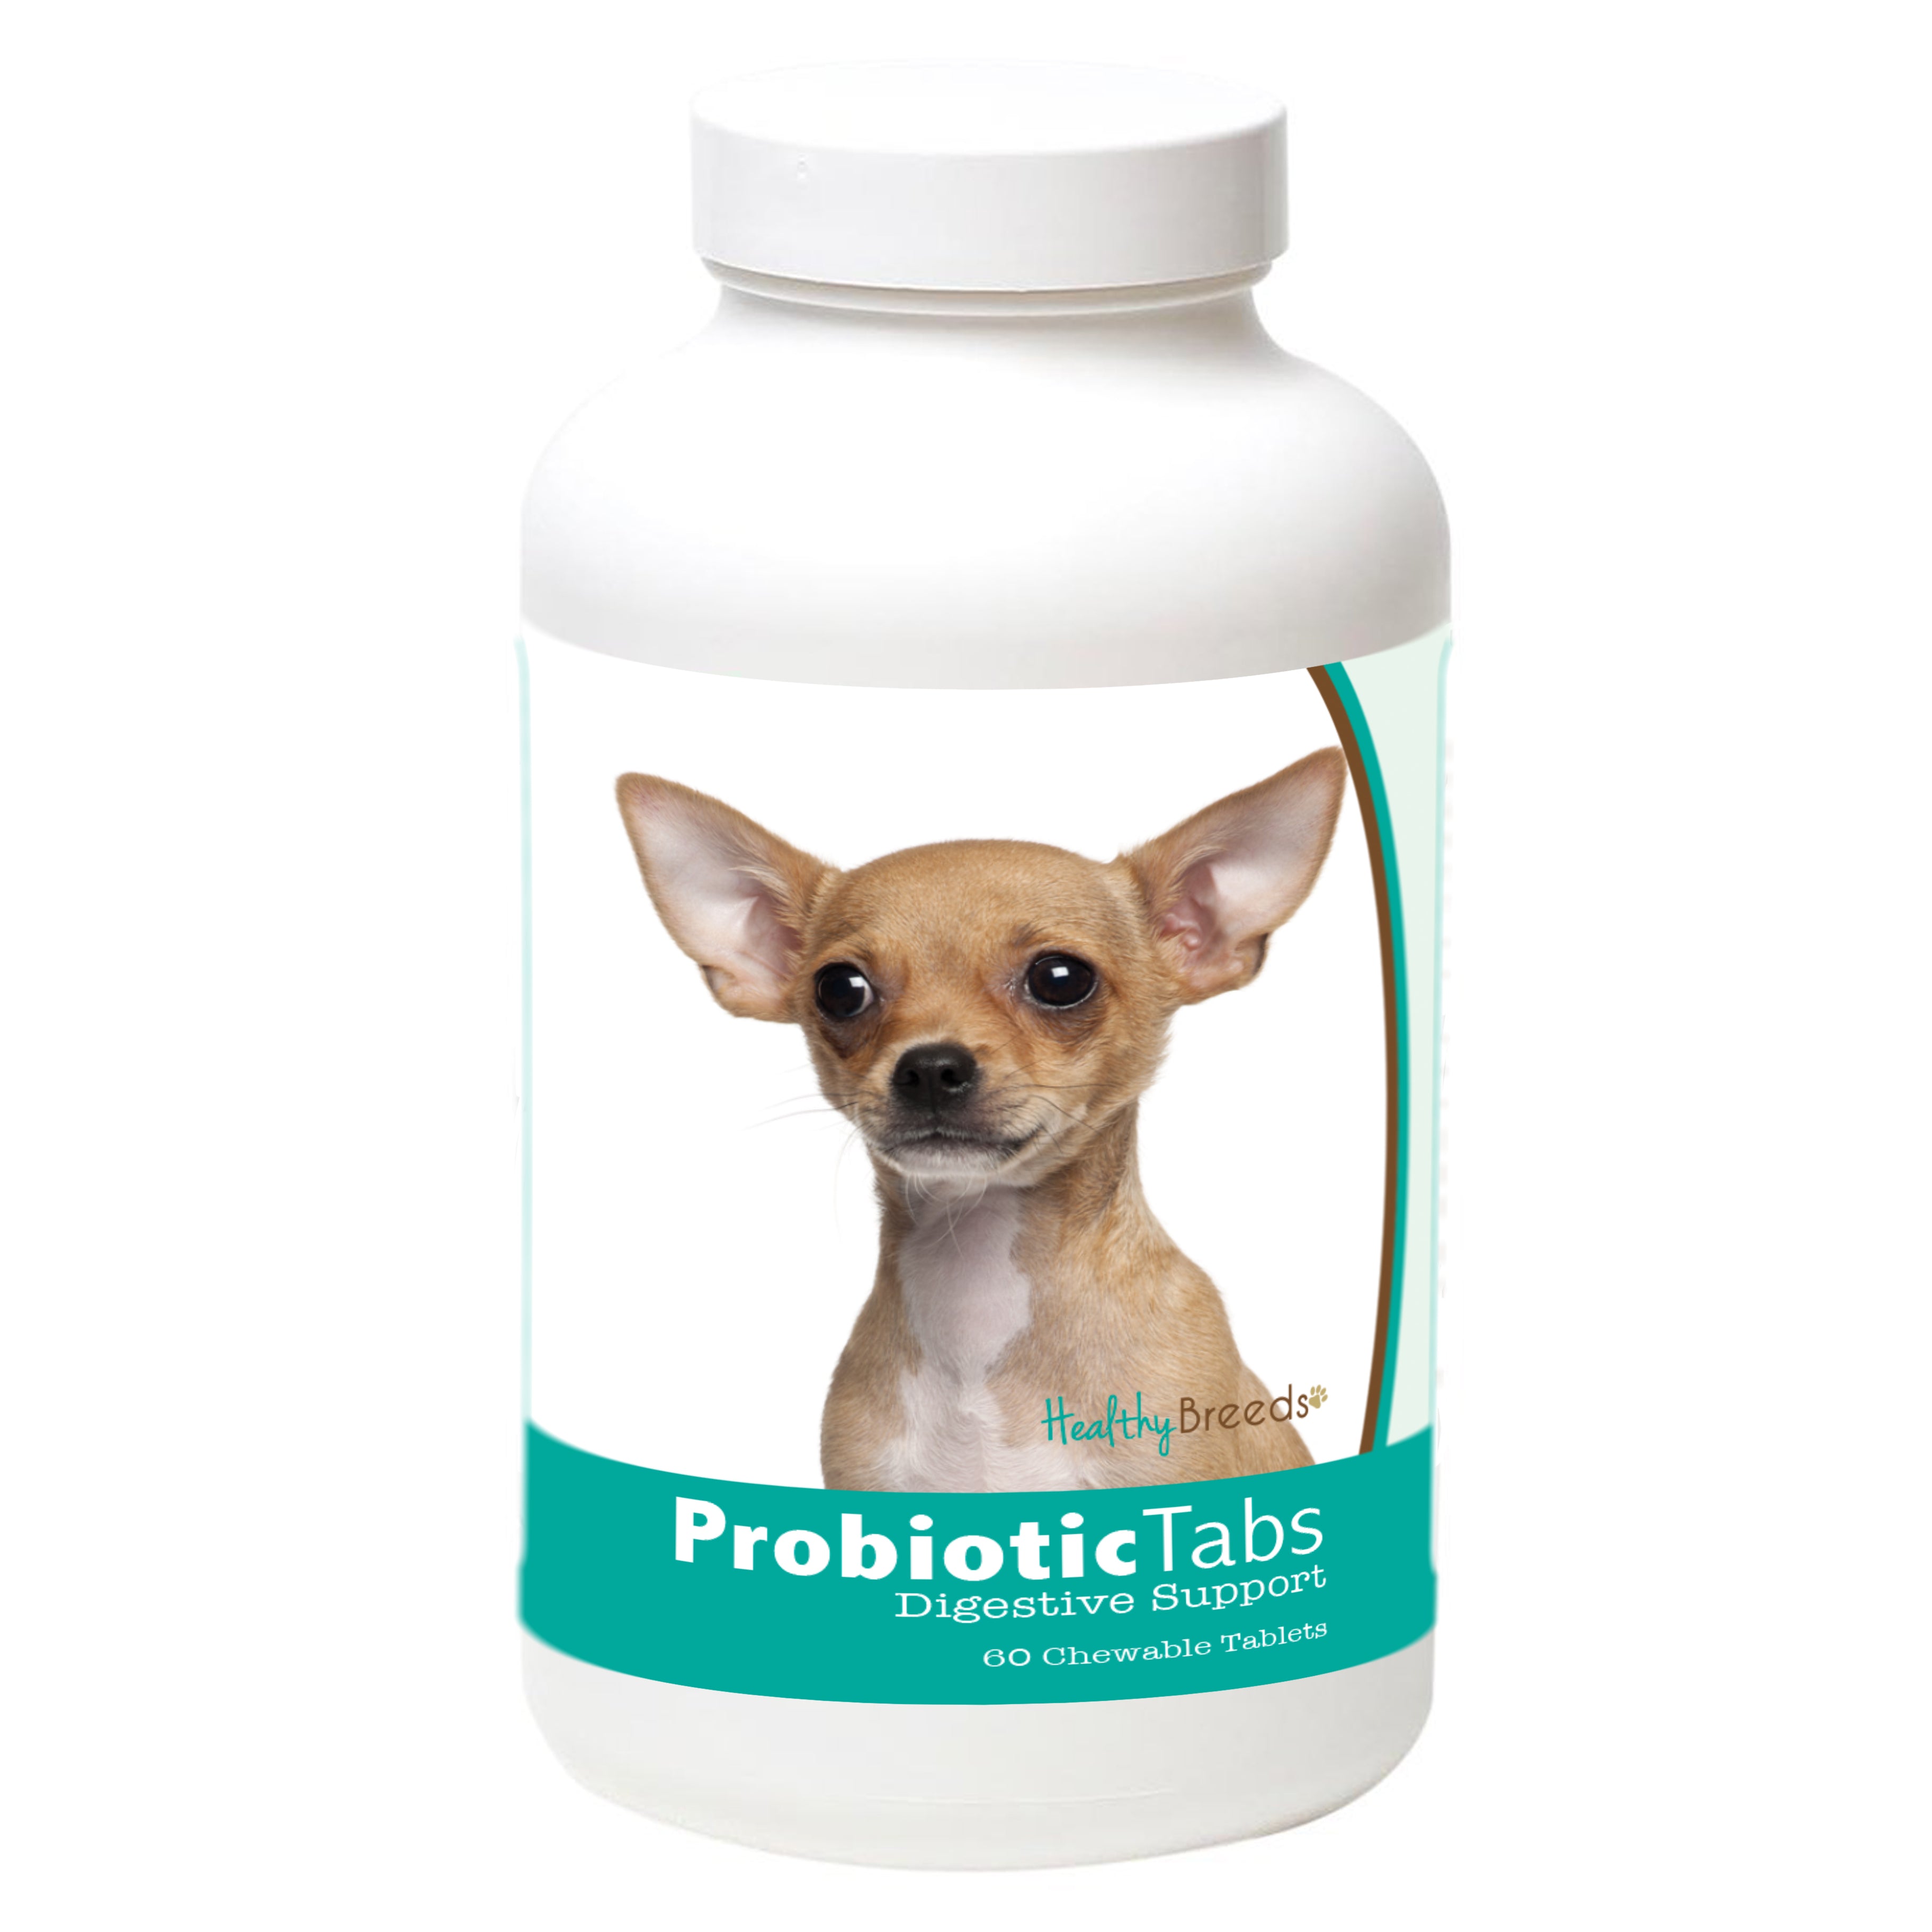 Chihuahua Probiotic and Digestive Support for Dogs 60 Count